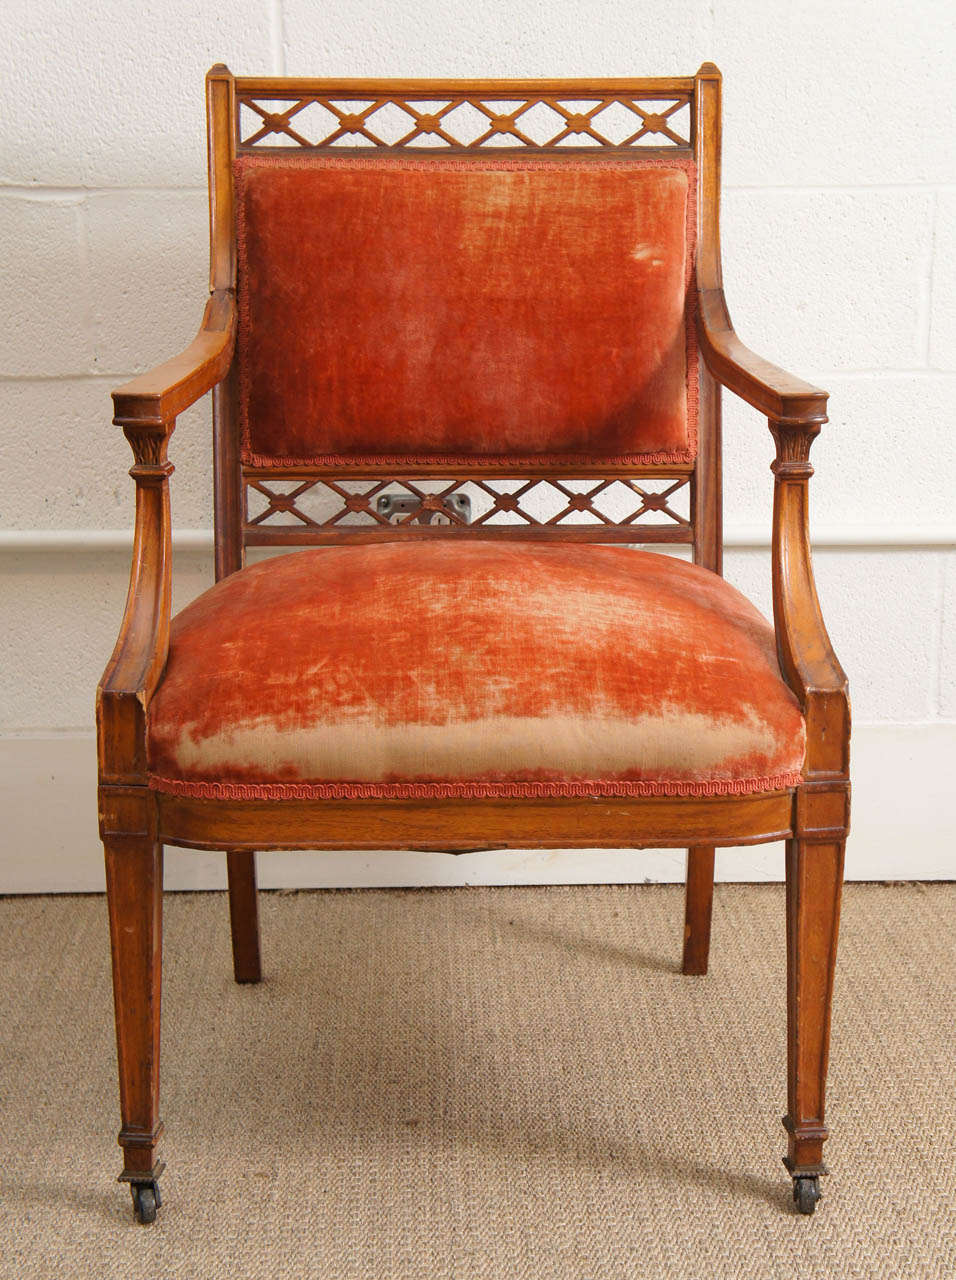 Here is a beautiful Regency chair in a worn silk velvet.
The chair is in sturdy condition with character wear on the surface.